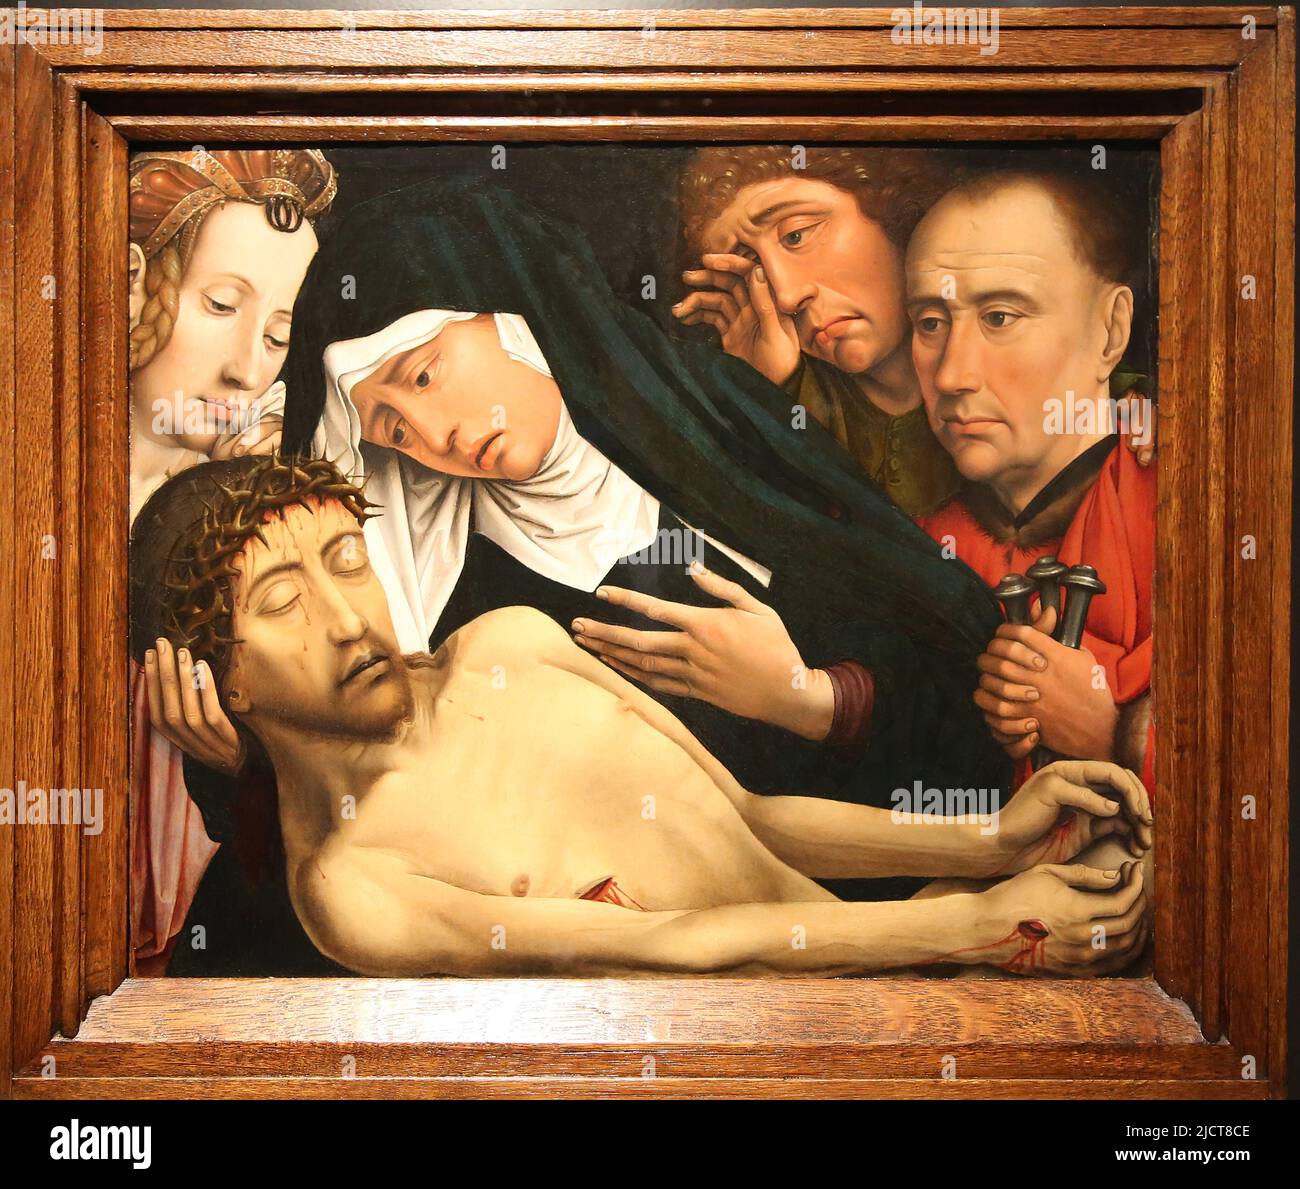 The Lamentation of Christ, by Colijn de Coter (1450/55-152/32).  Brussels, c. 1510-1515. Oil on panel. Rijksmuseum. Amsterdam. Netherlands. Stock Photo